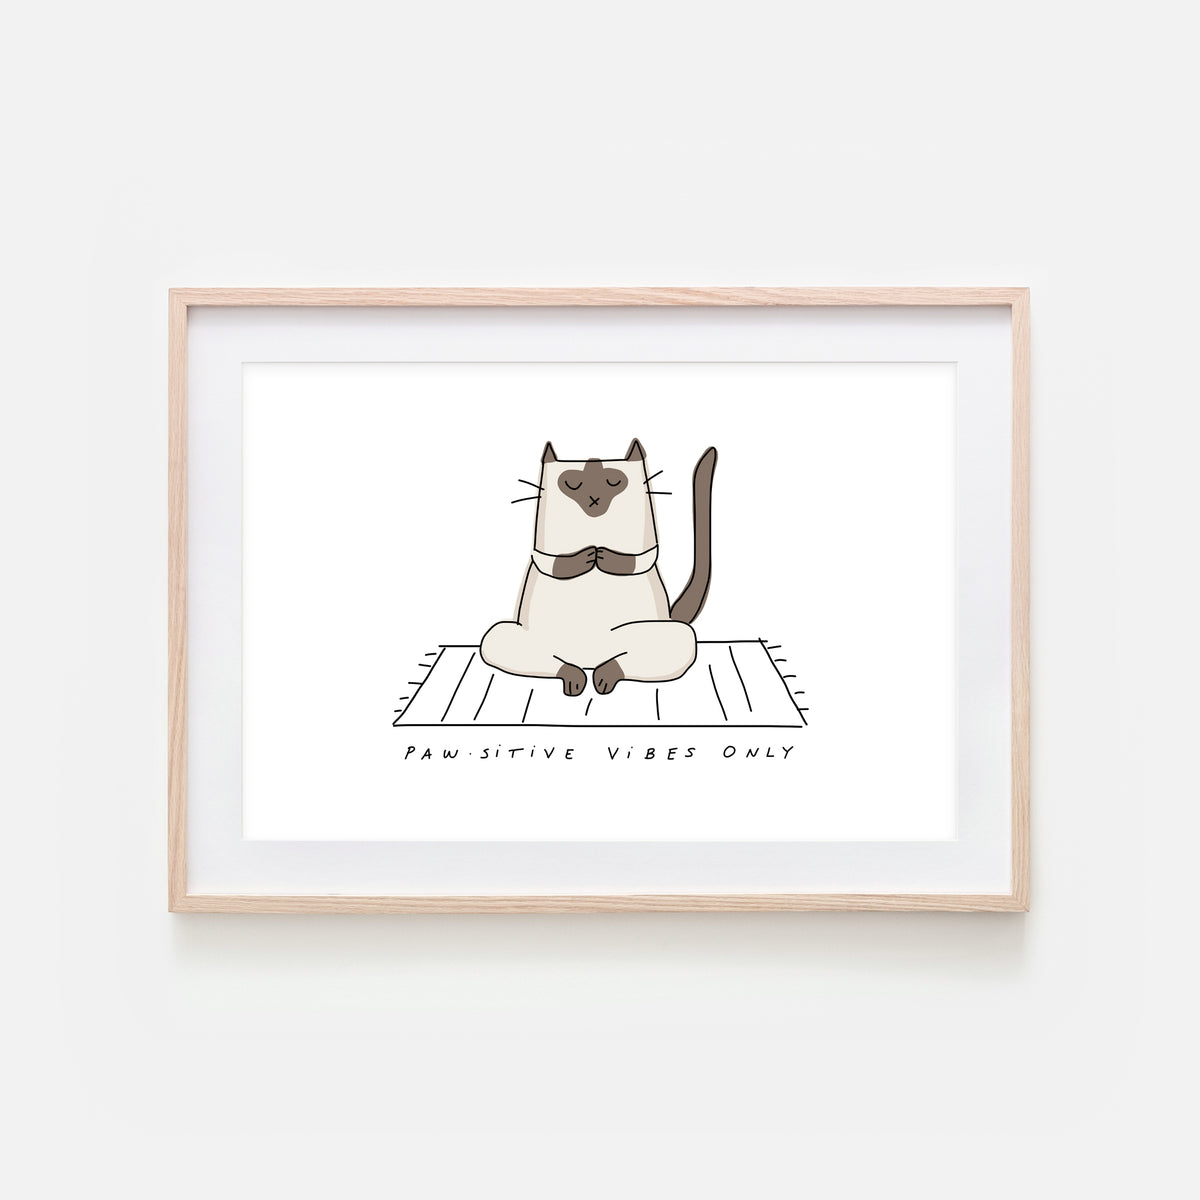 25 Motivational cat ideas  cat icon, cat drawing, silly cats